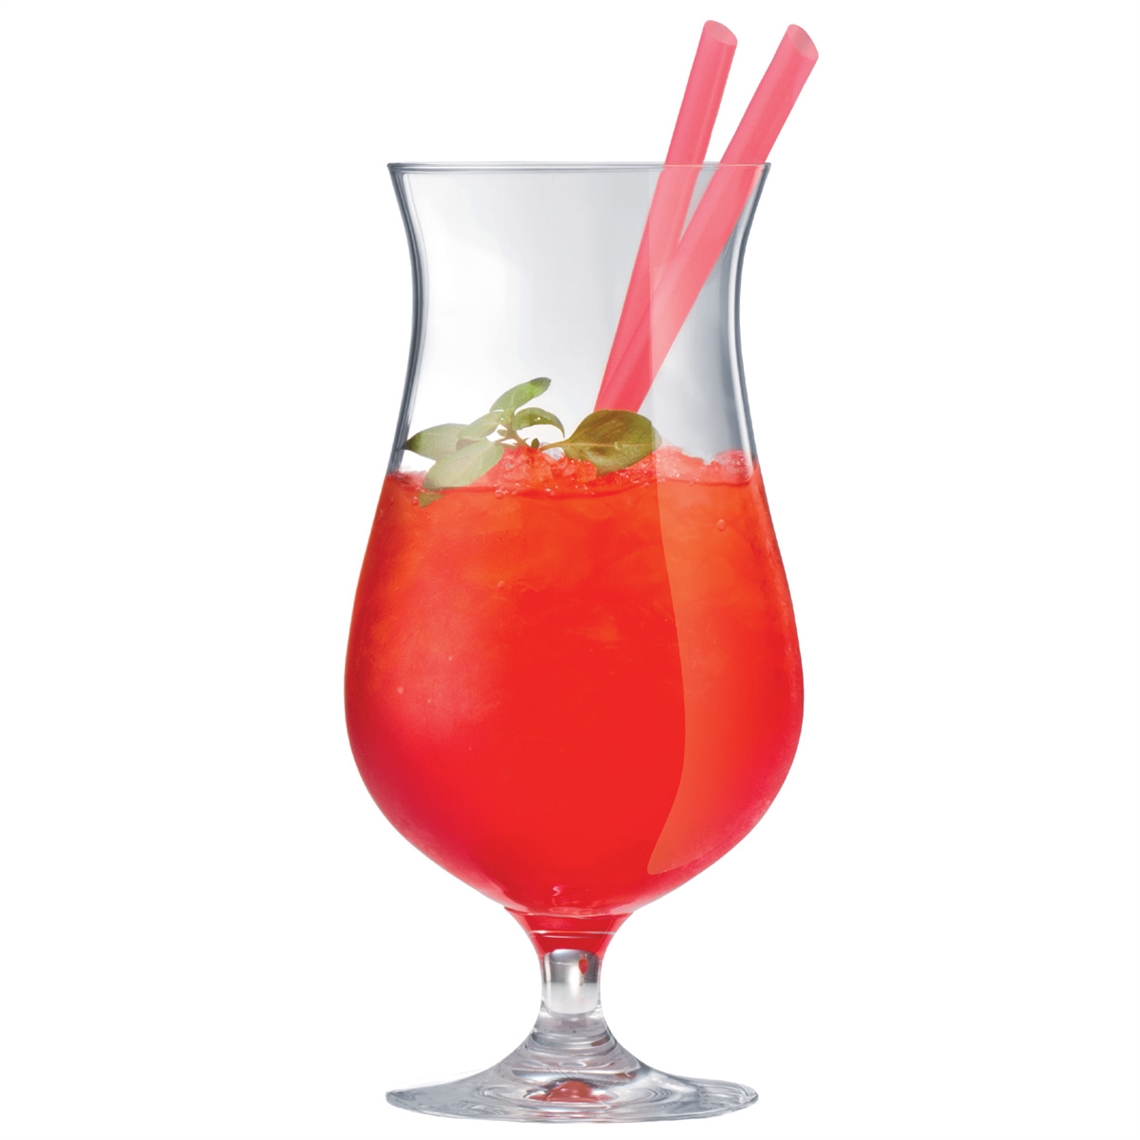 View more restaurant glasses - schott zwiesel from our Cocktail Glasses range